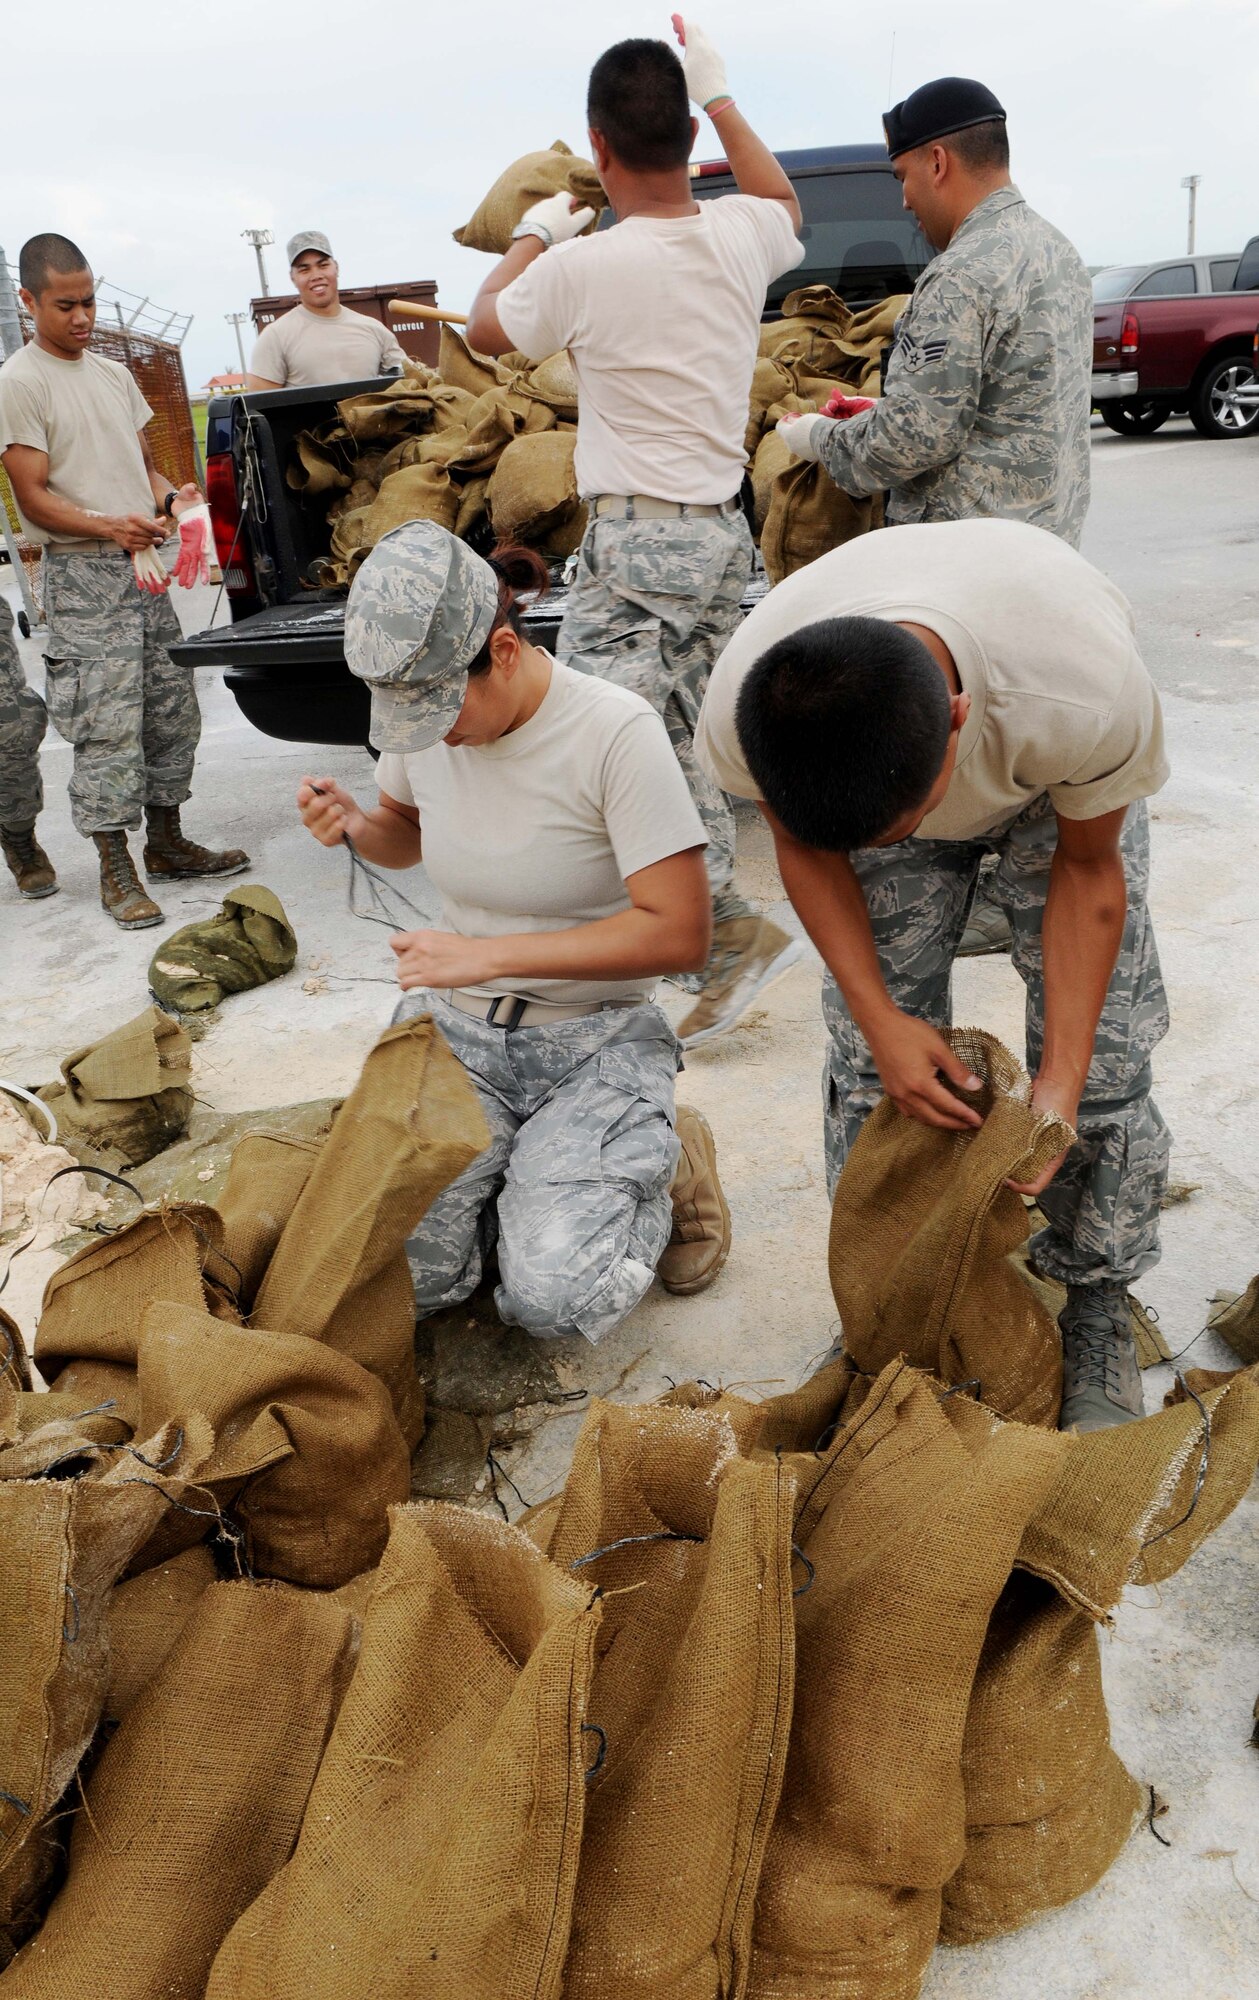 ANDERSEN AIR FORCE BASE, Guam - Airmen from the 254th Security Forces Squadron Guam Air National Guard fill and load sandbags at Andersen's Self Help Store Sept. 28 in preparation for a tropical storm headed for the island. Due to the untimely weather, Andersen leadership canceled the Team Andersen Air Show 2009 scheduled for Sept. 30.  The air show was to feature the United States Air Force Thunderbirds. (U.S. Air Force photo by Senior Airman Nichelle Anderson)